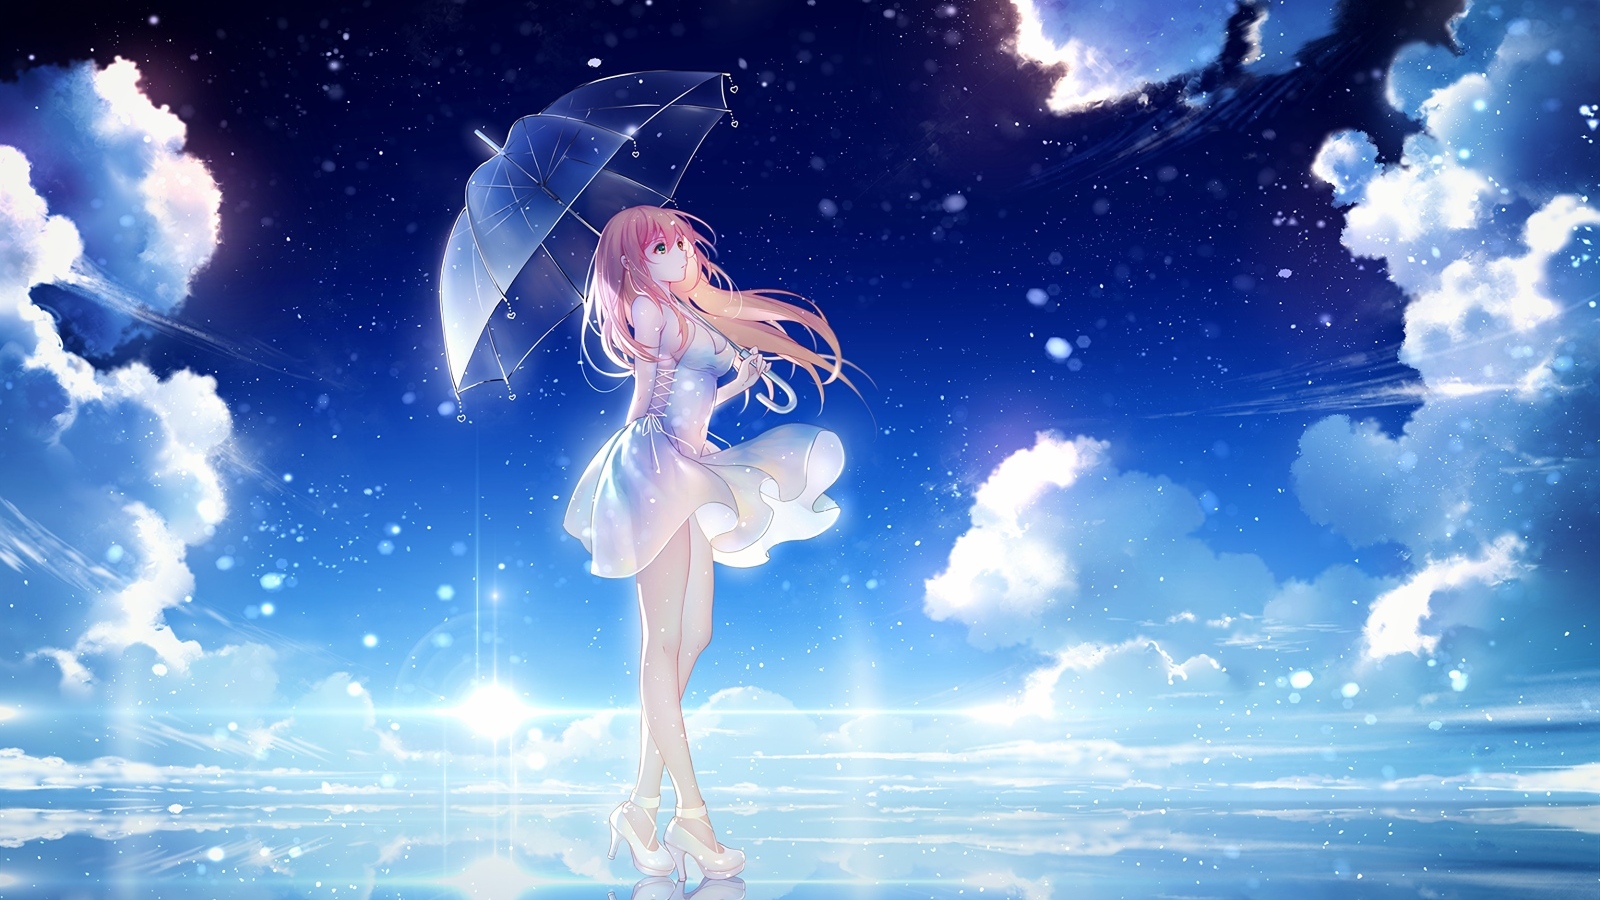 Anime girl under an umbrella in the water